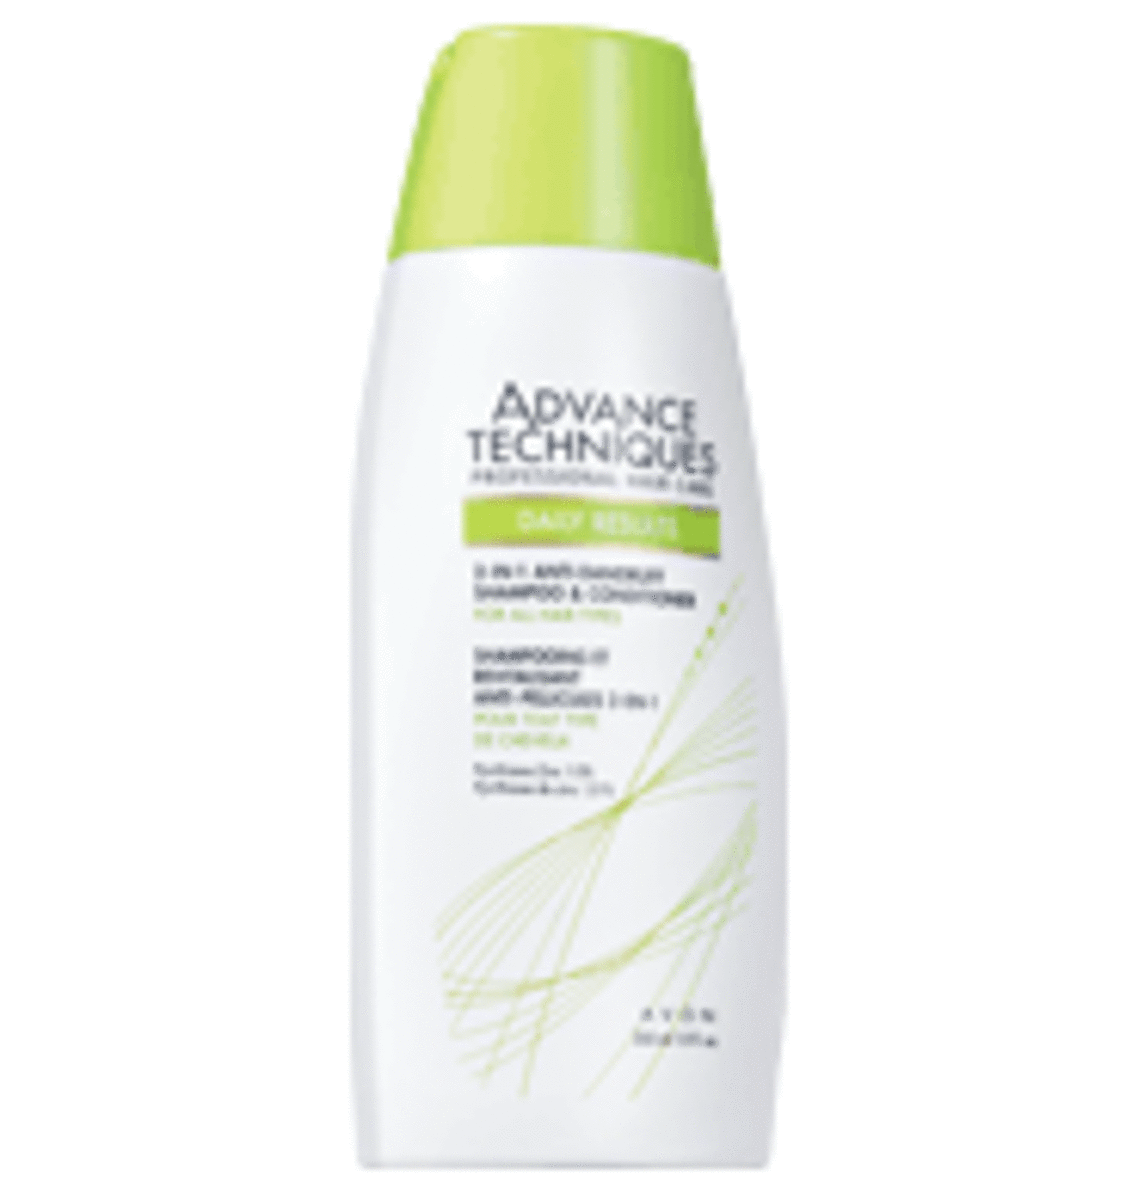 Top 5 Economical Shampoos and Conditioners